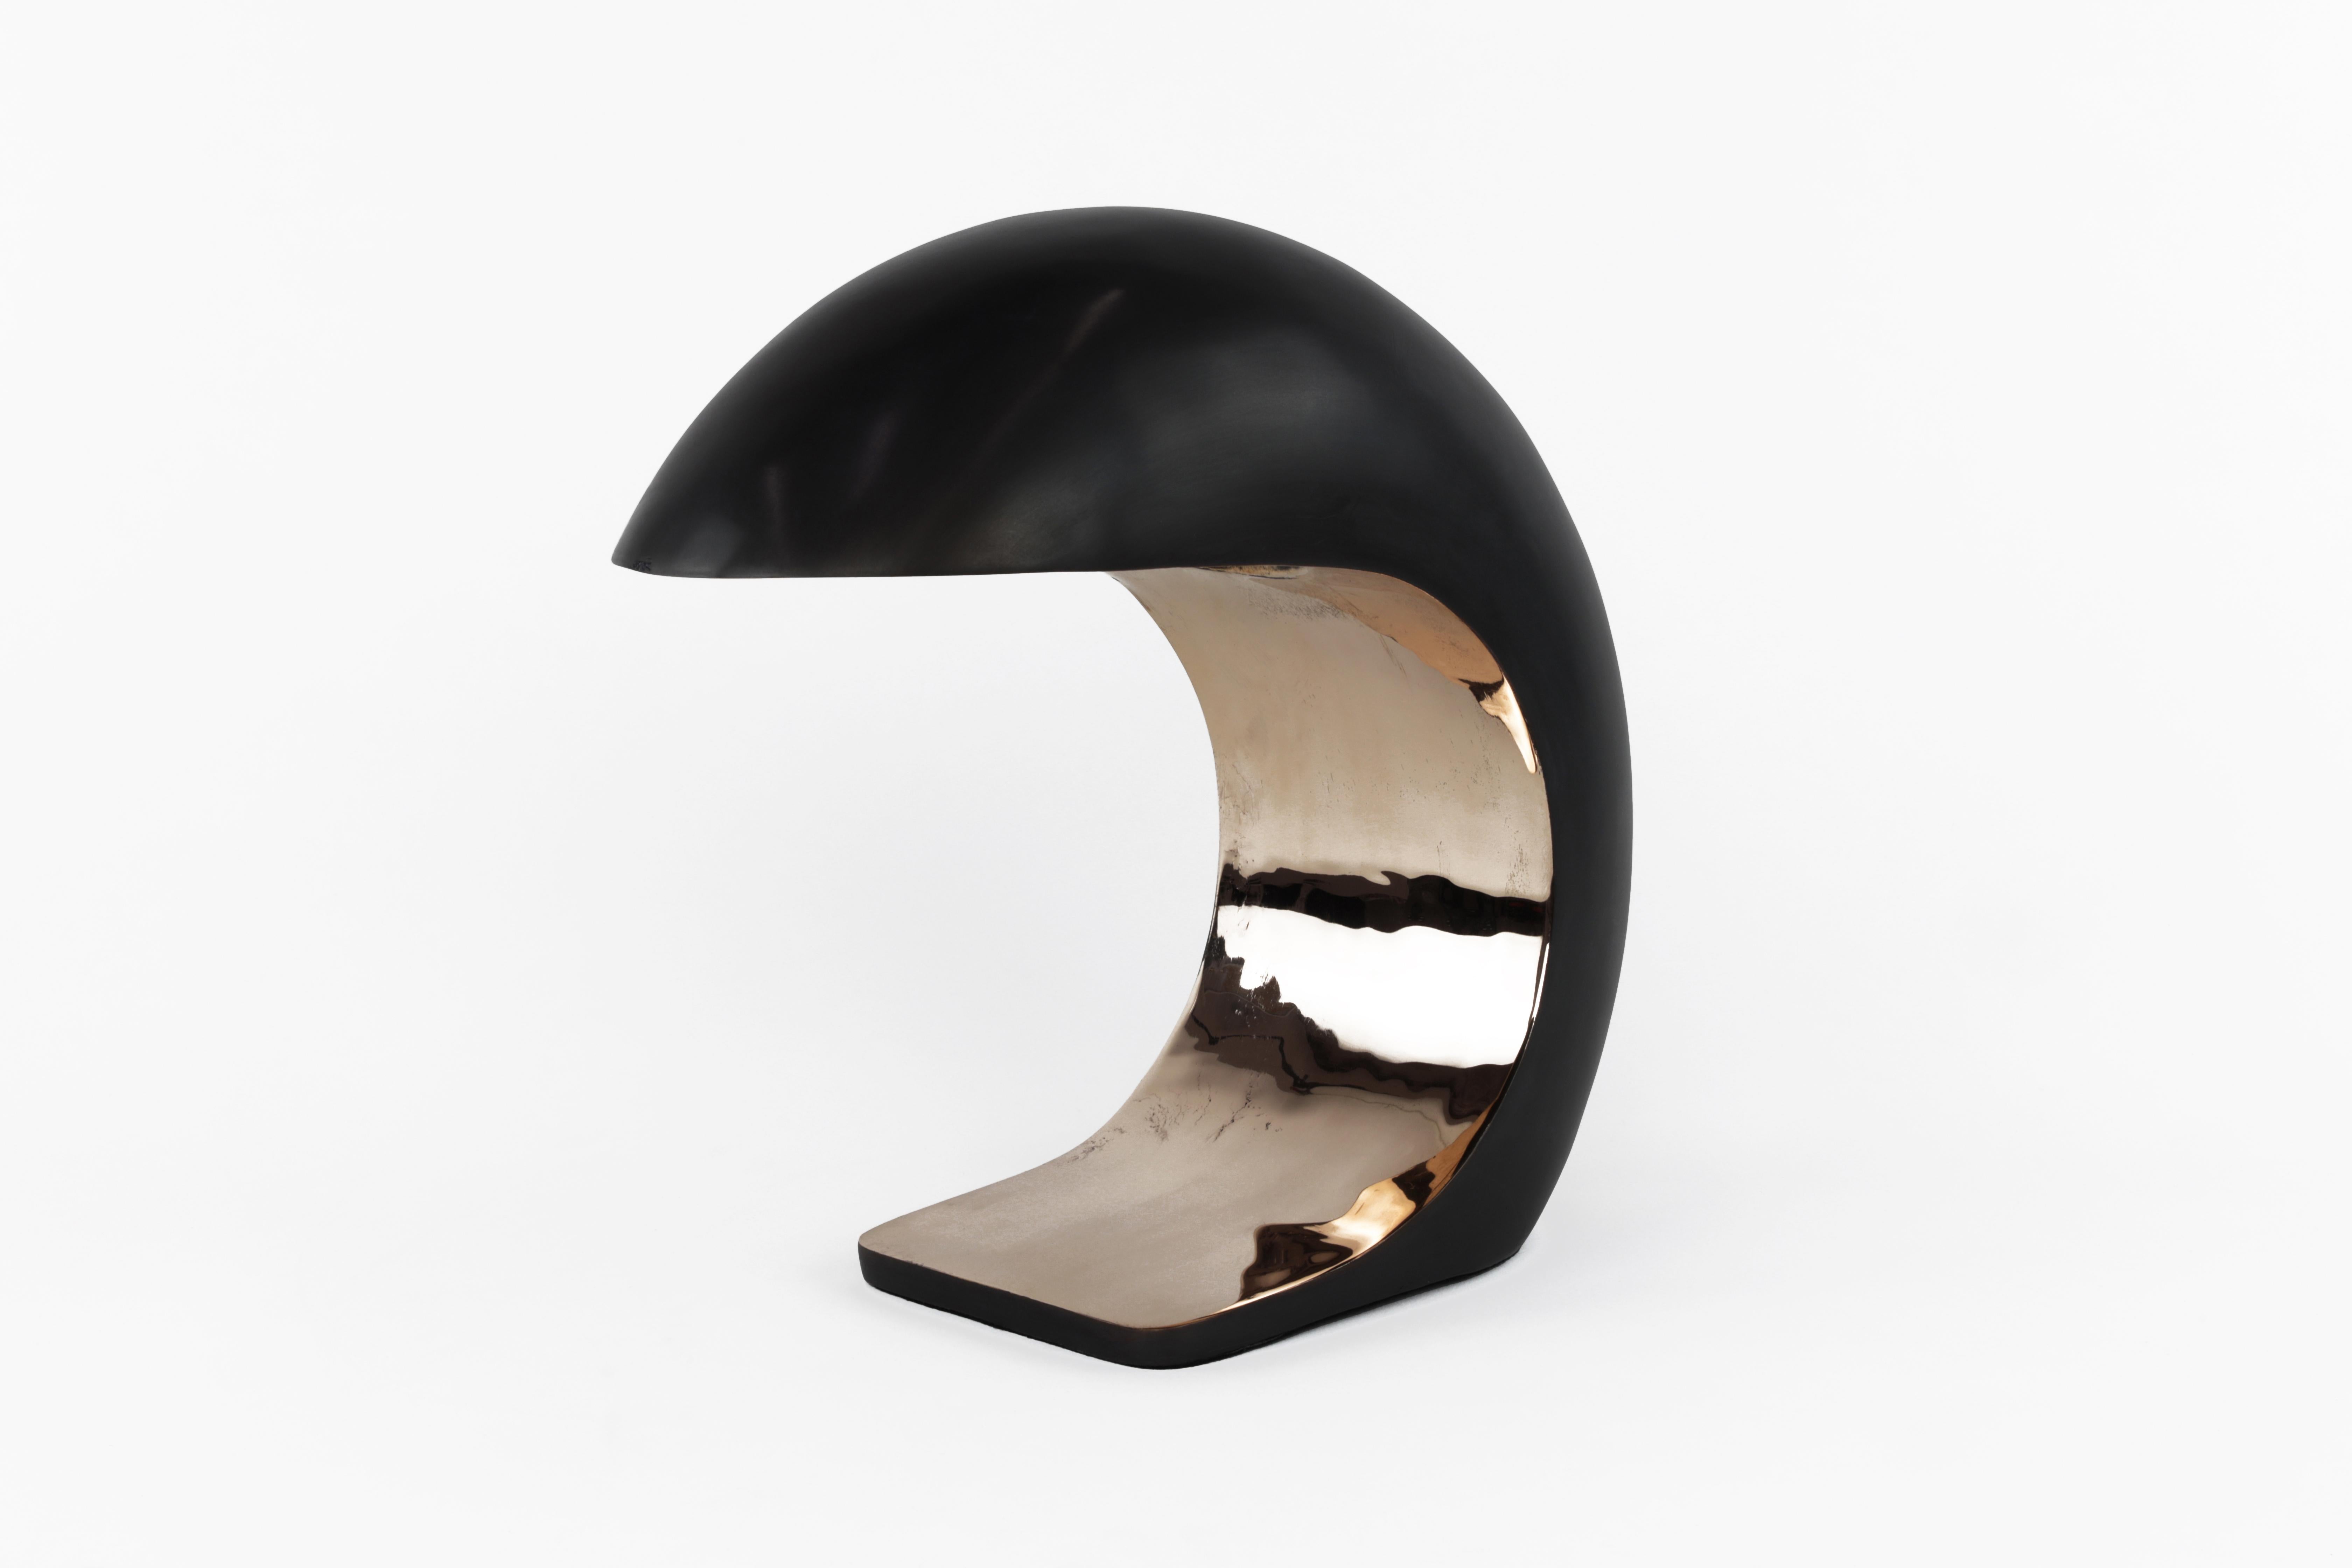 The (medium) NAUTILUS lamp is inspired by midcentury Italian design.
It is cast bronze and weighs up to 20 pounds. The outer shell has a blackened patina and the face is high polished to a mirrored finish.
 
The NAUTILUS illuminates by a three-way